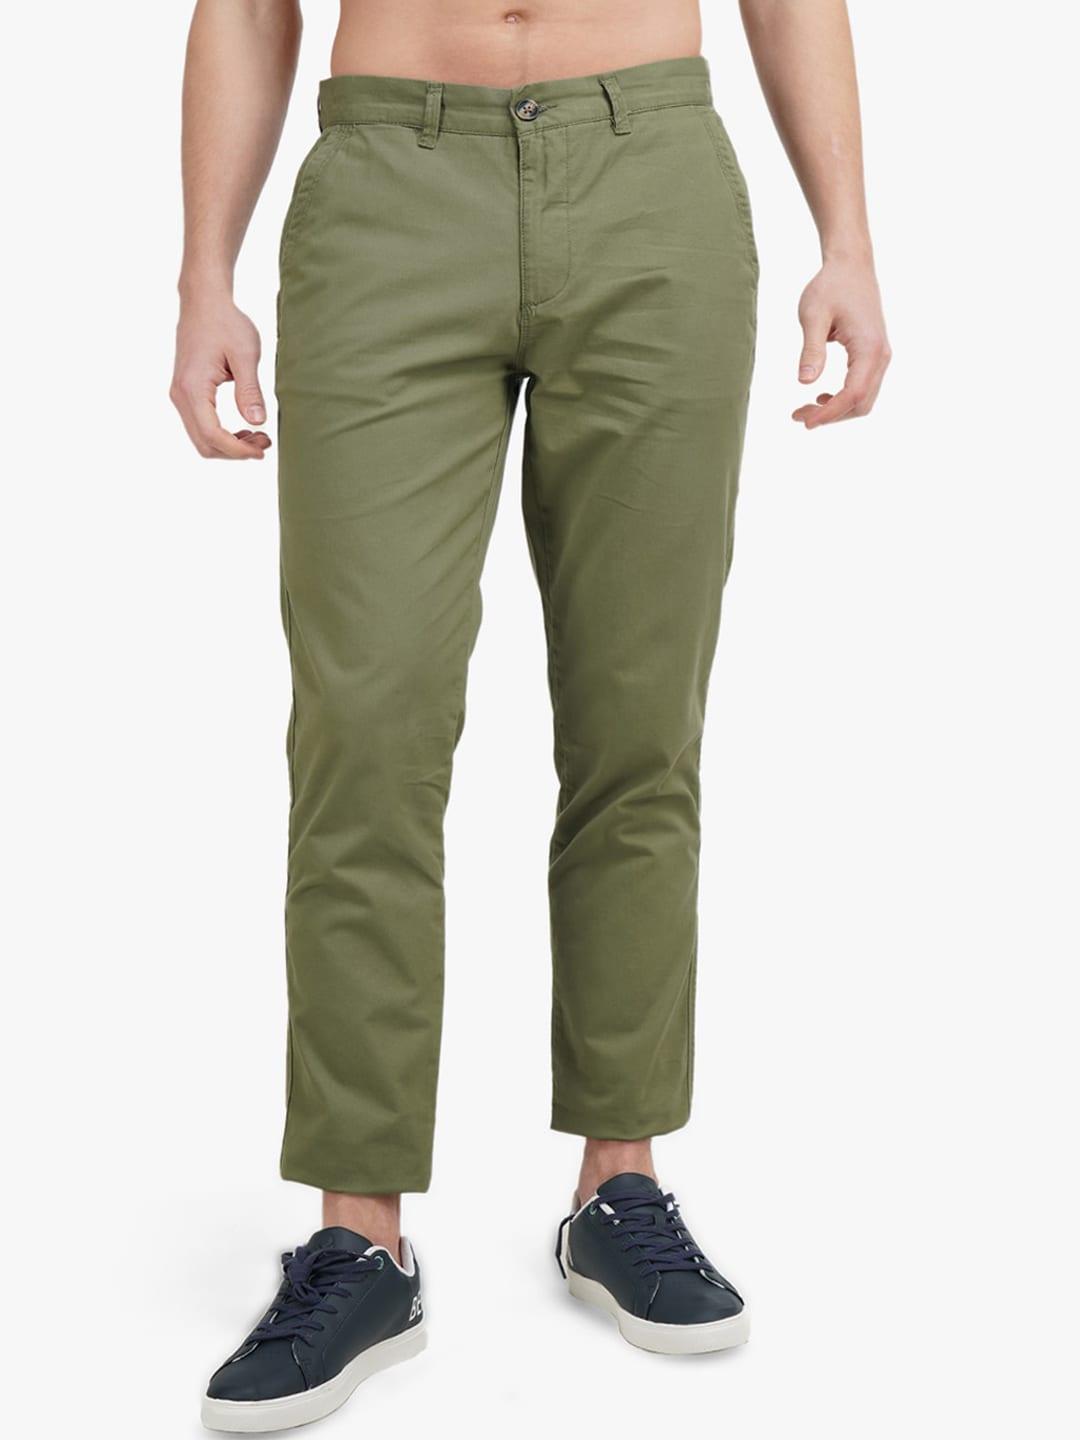 United Colors of Benetton Men Olive Green Slim Fit Chinos Trousers